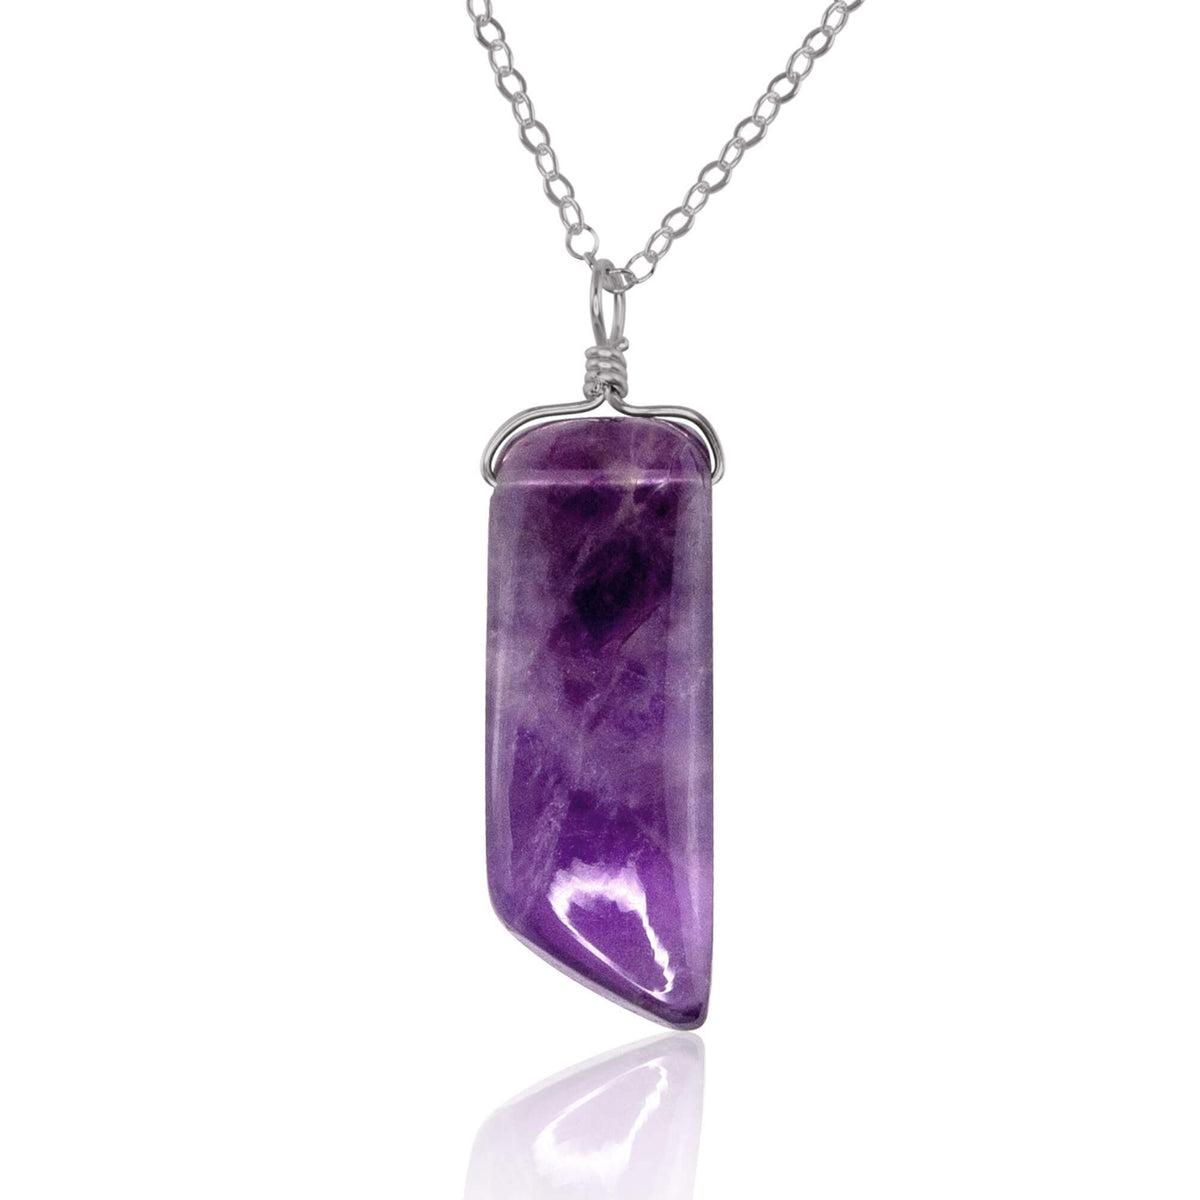 Smooth Point Pendant Necklace - Amethyst - Stainless Steel - Luna Tide Handmade Jewellery